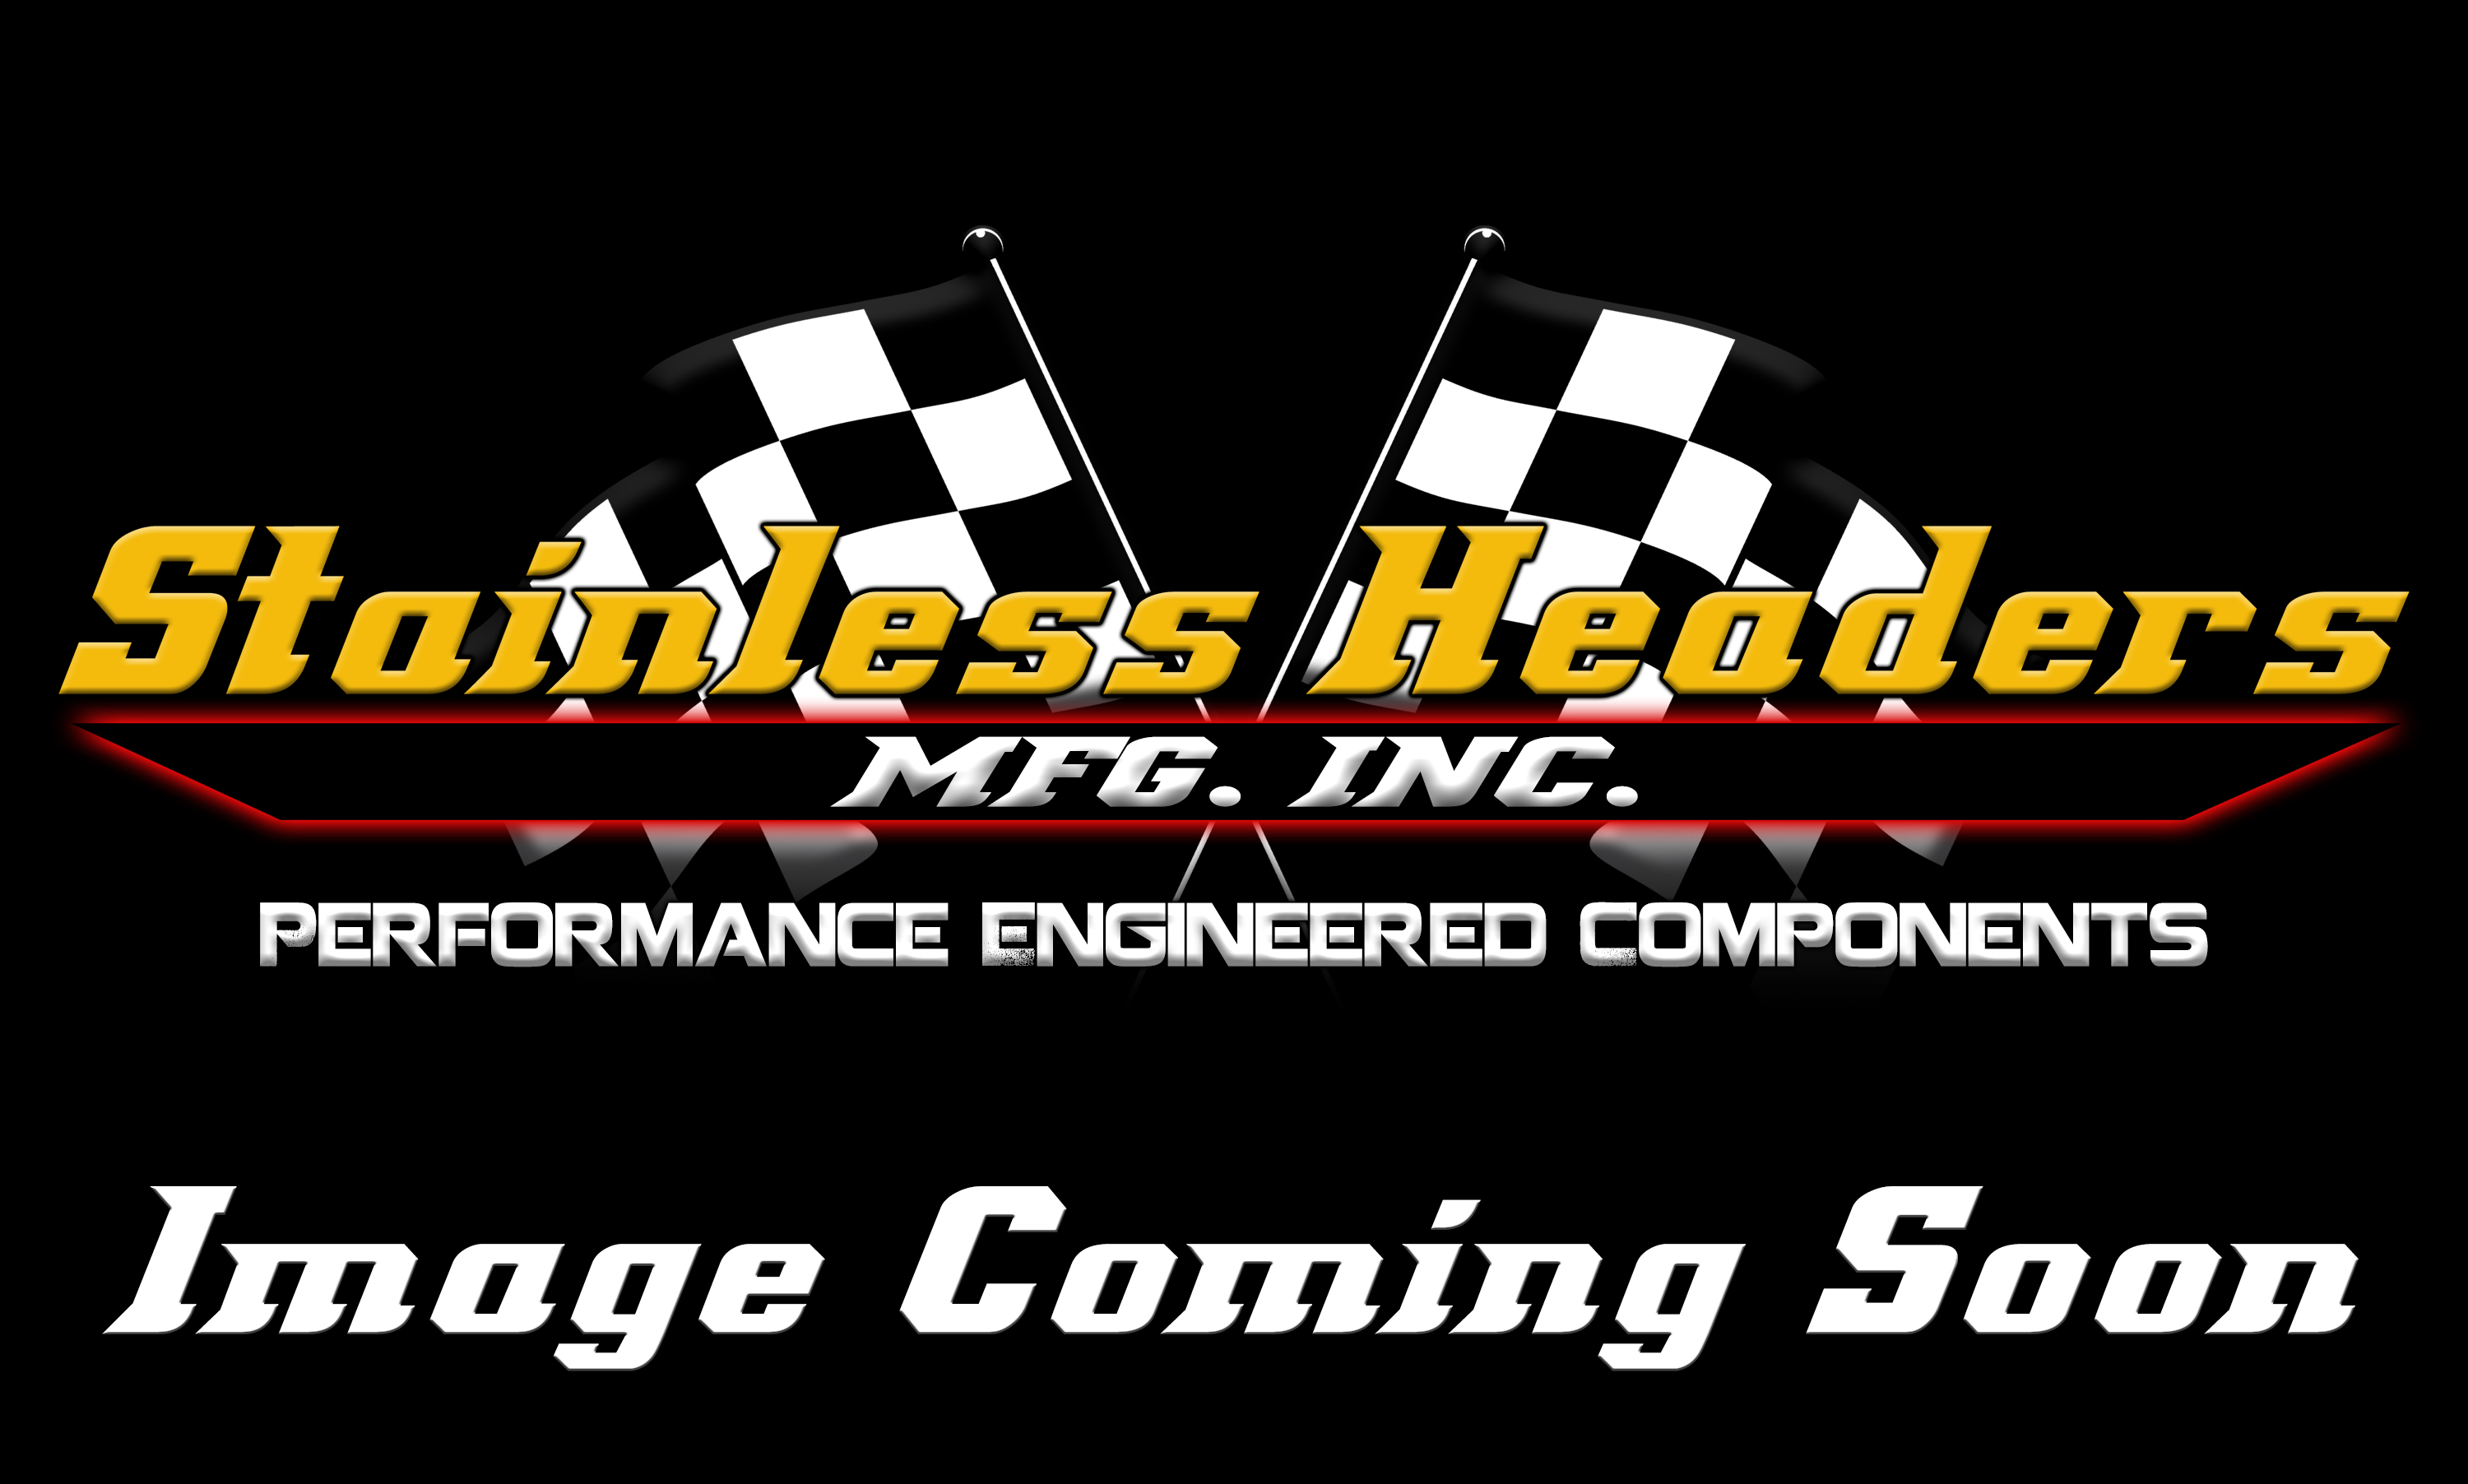 Stainless Headers - Nissan RB25 Side-Mount Turbo Manifold Build Kit